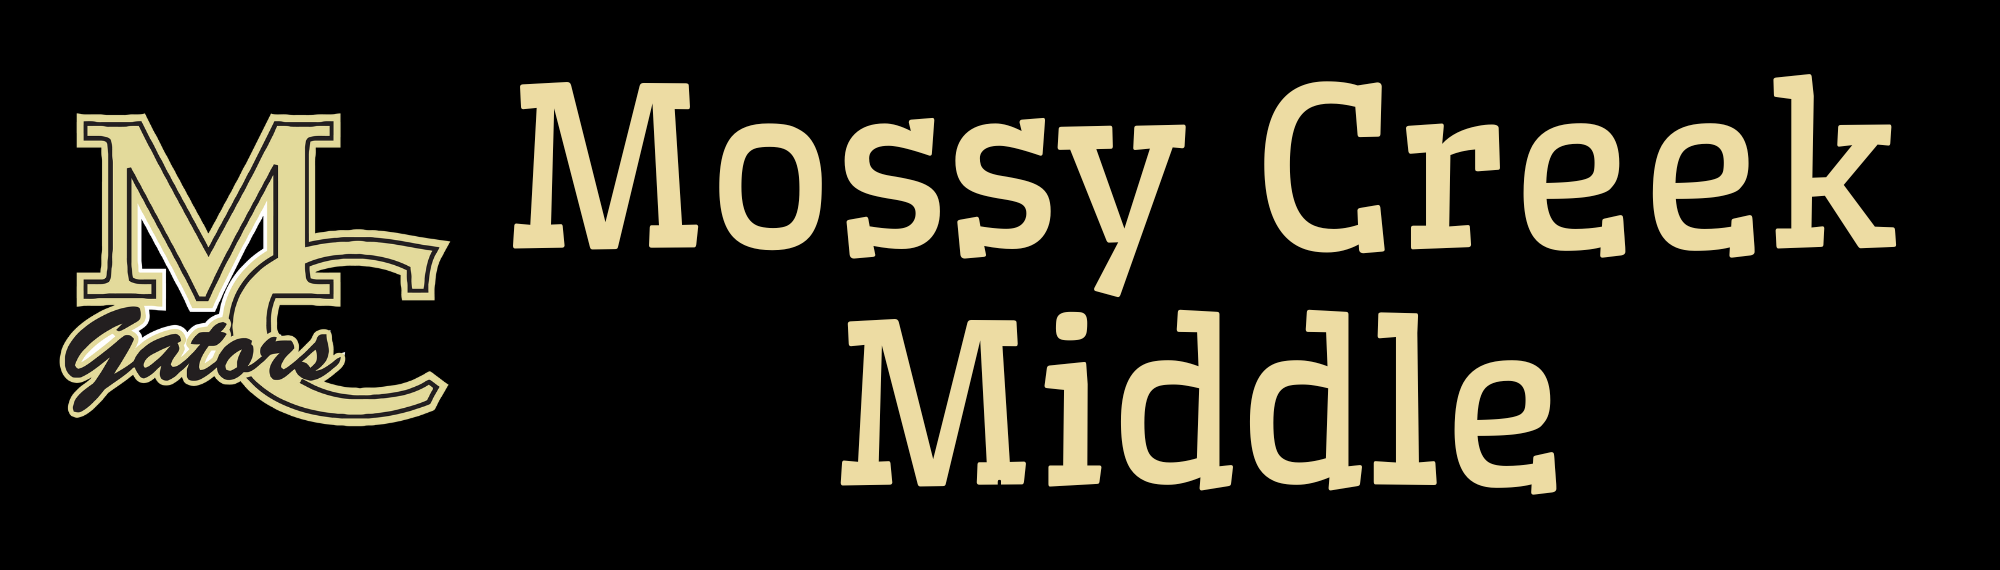 Mossy Creek Middle 